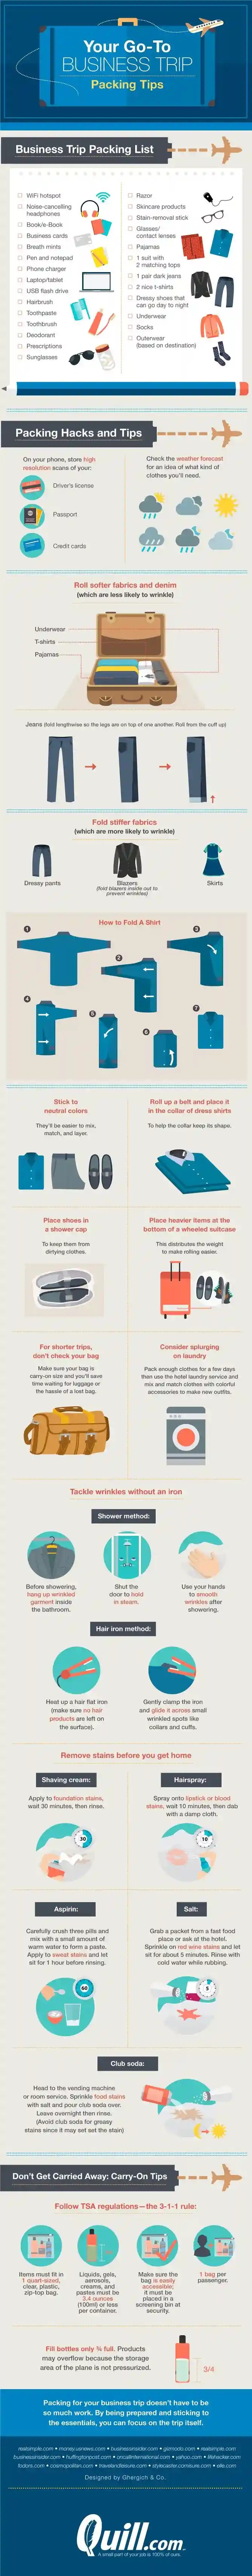 business-trip-packing-tips-infographic